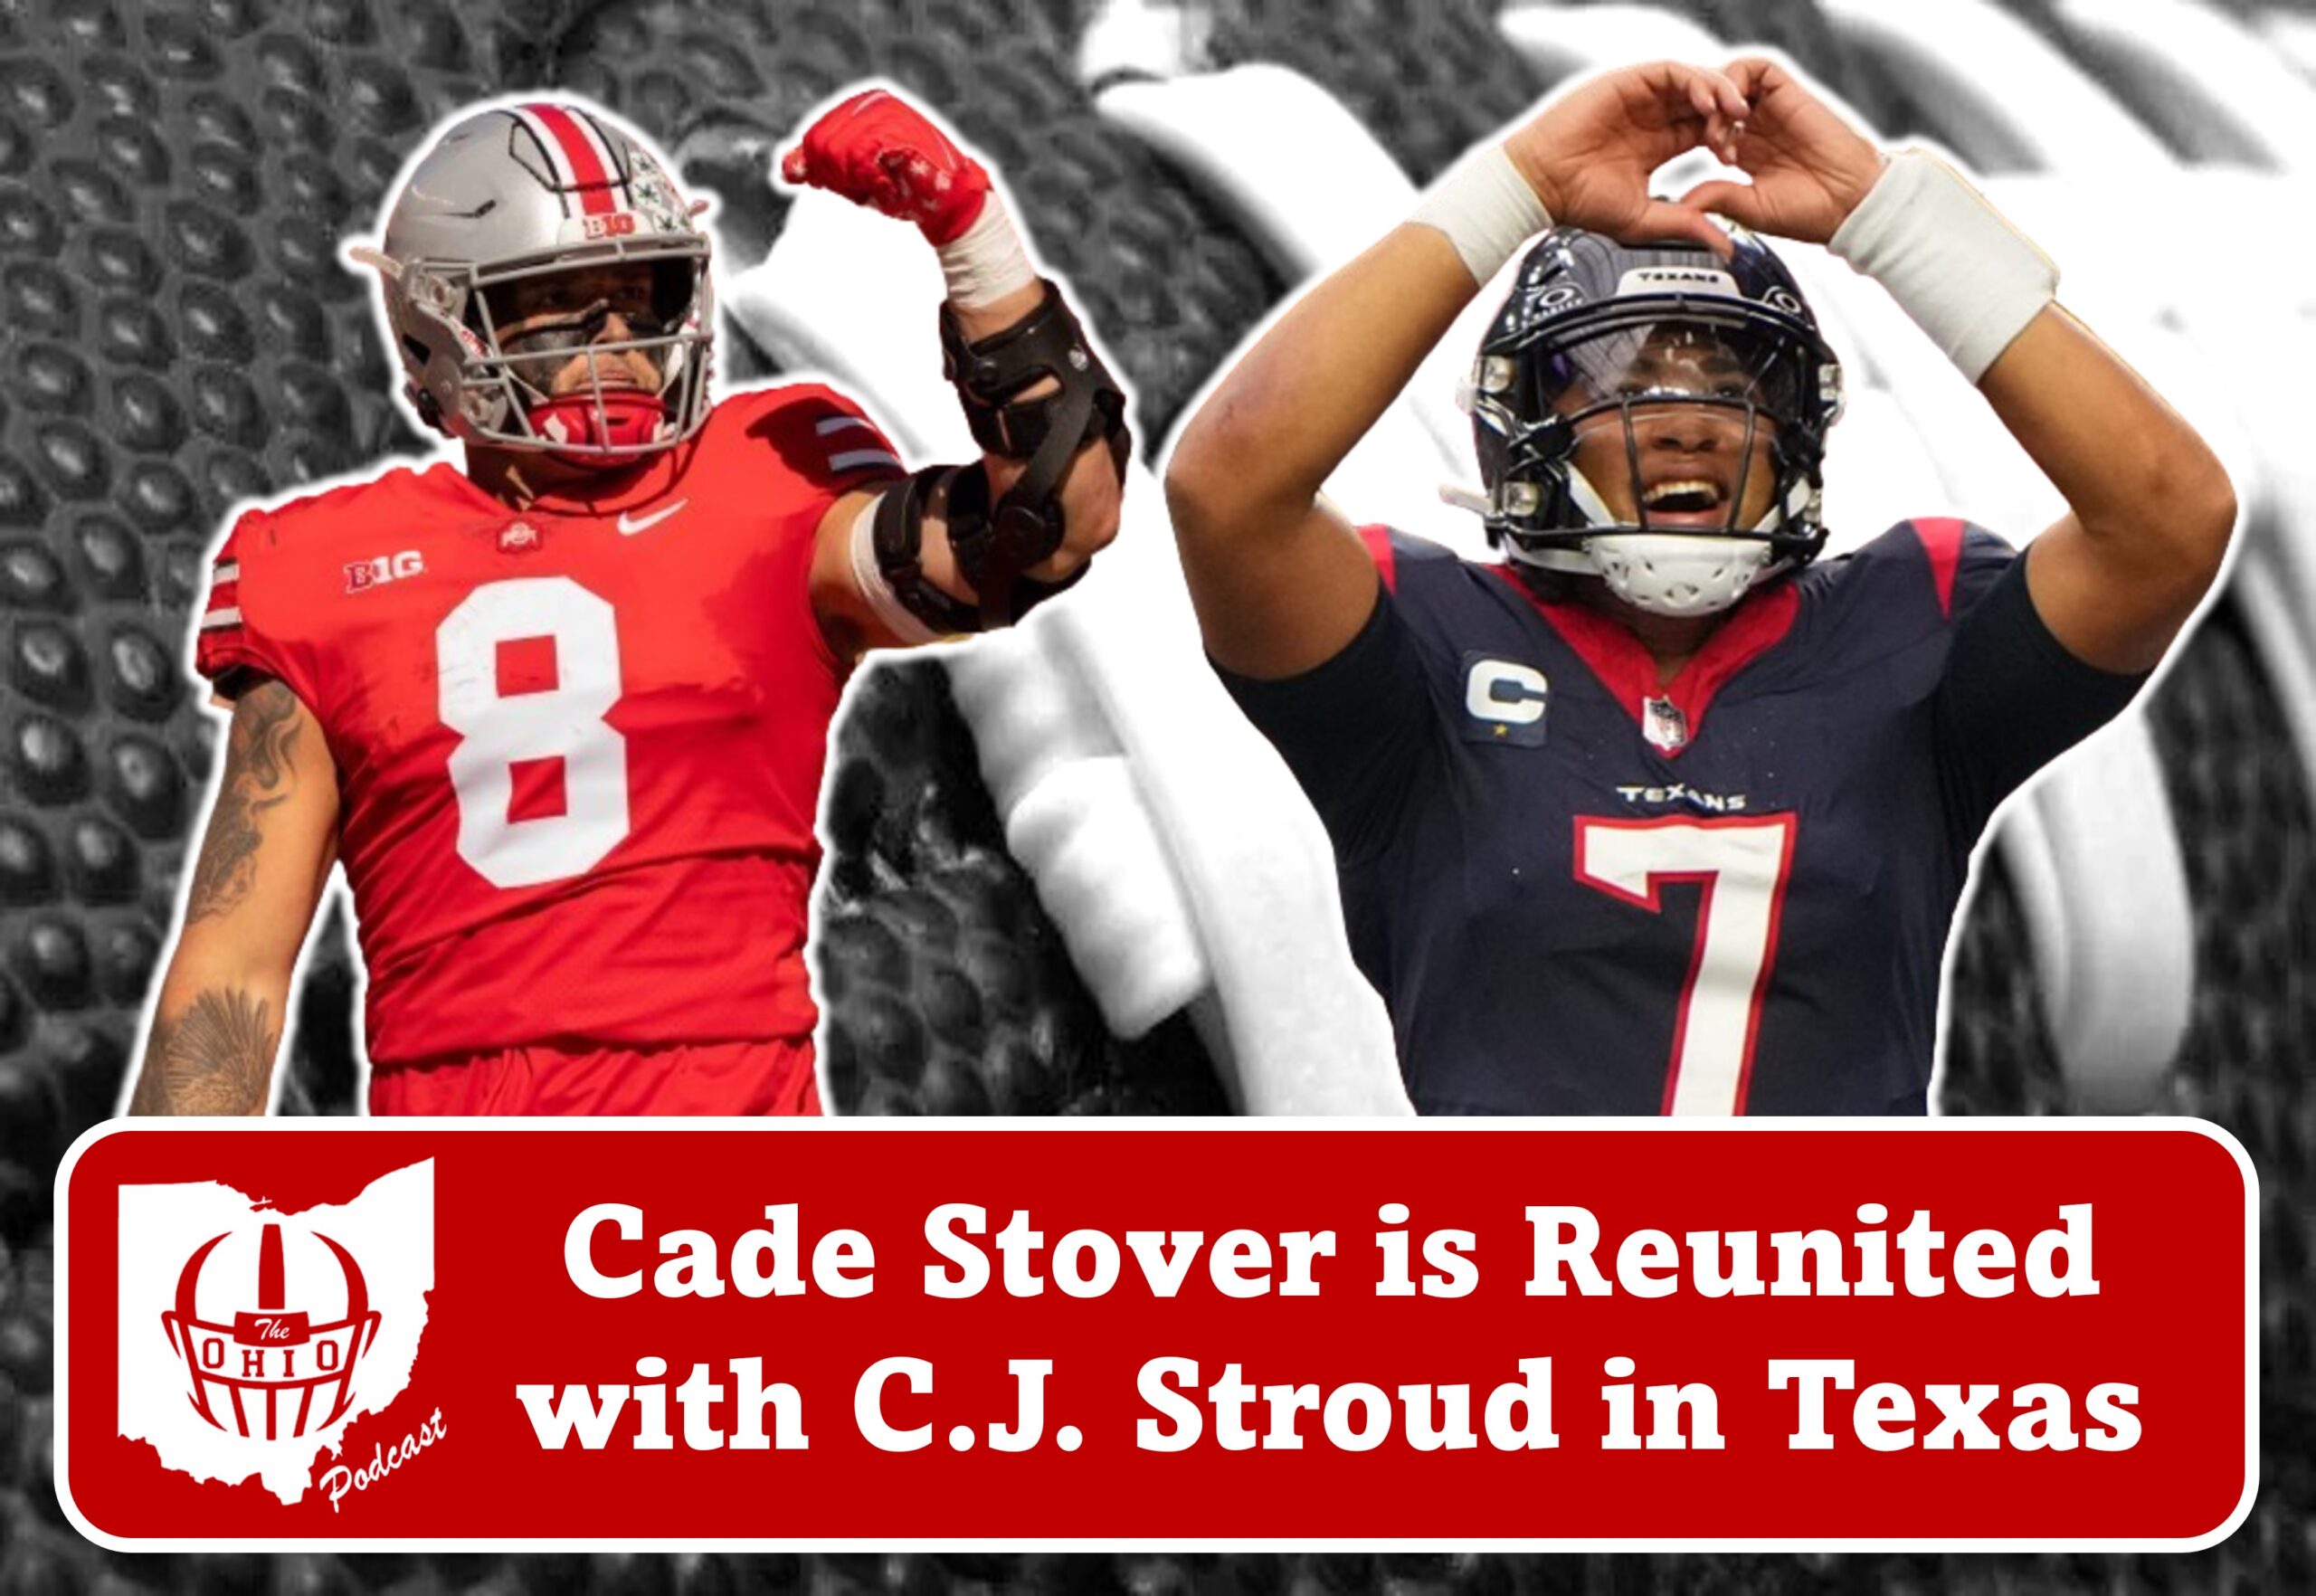 Cade Stover is Reunited with C.J. Stroud in Texas